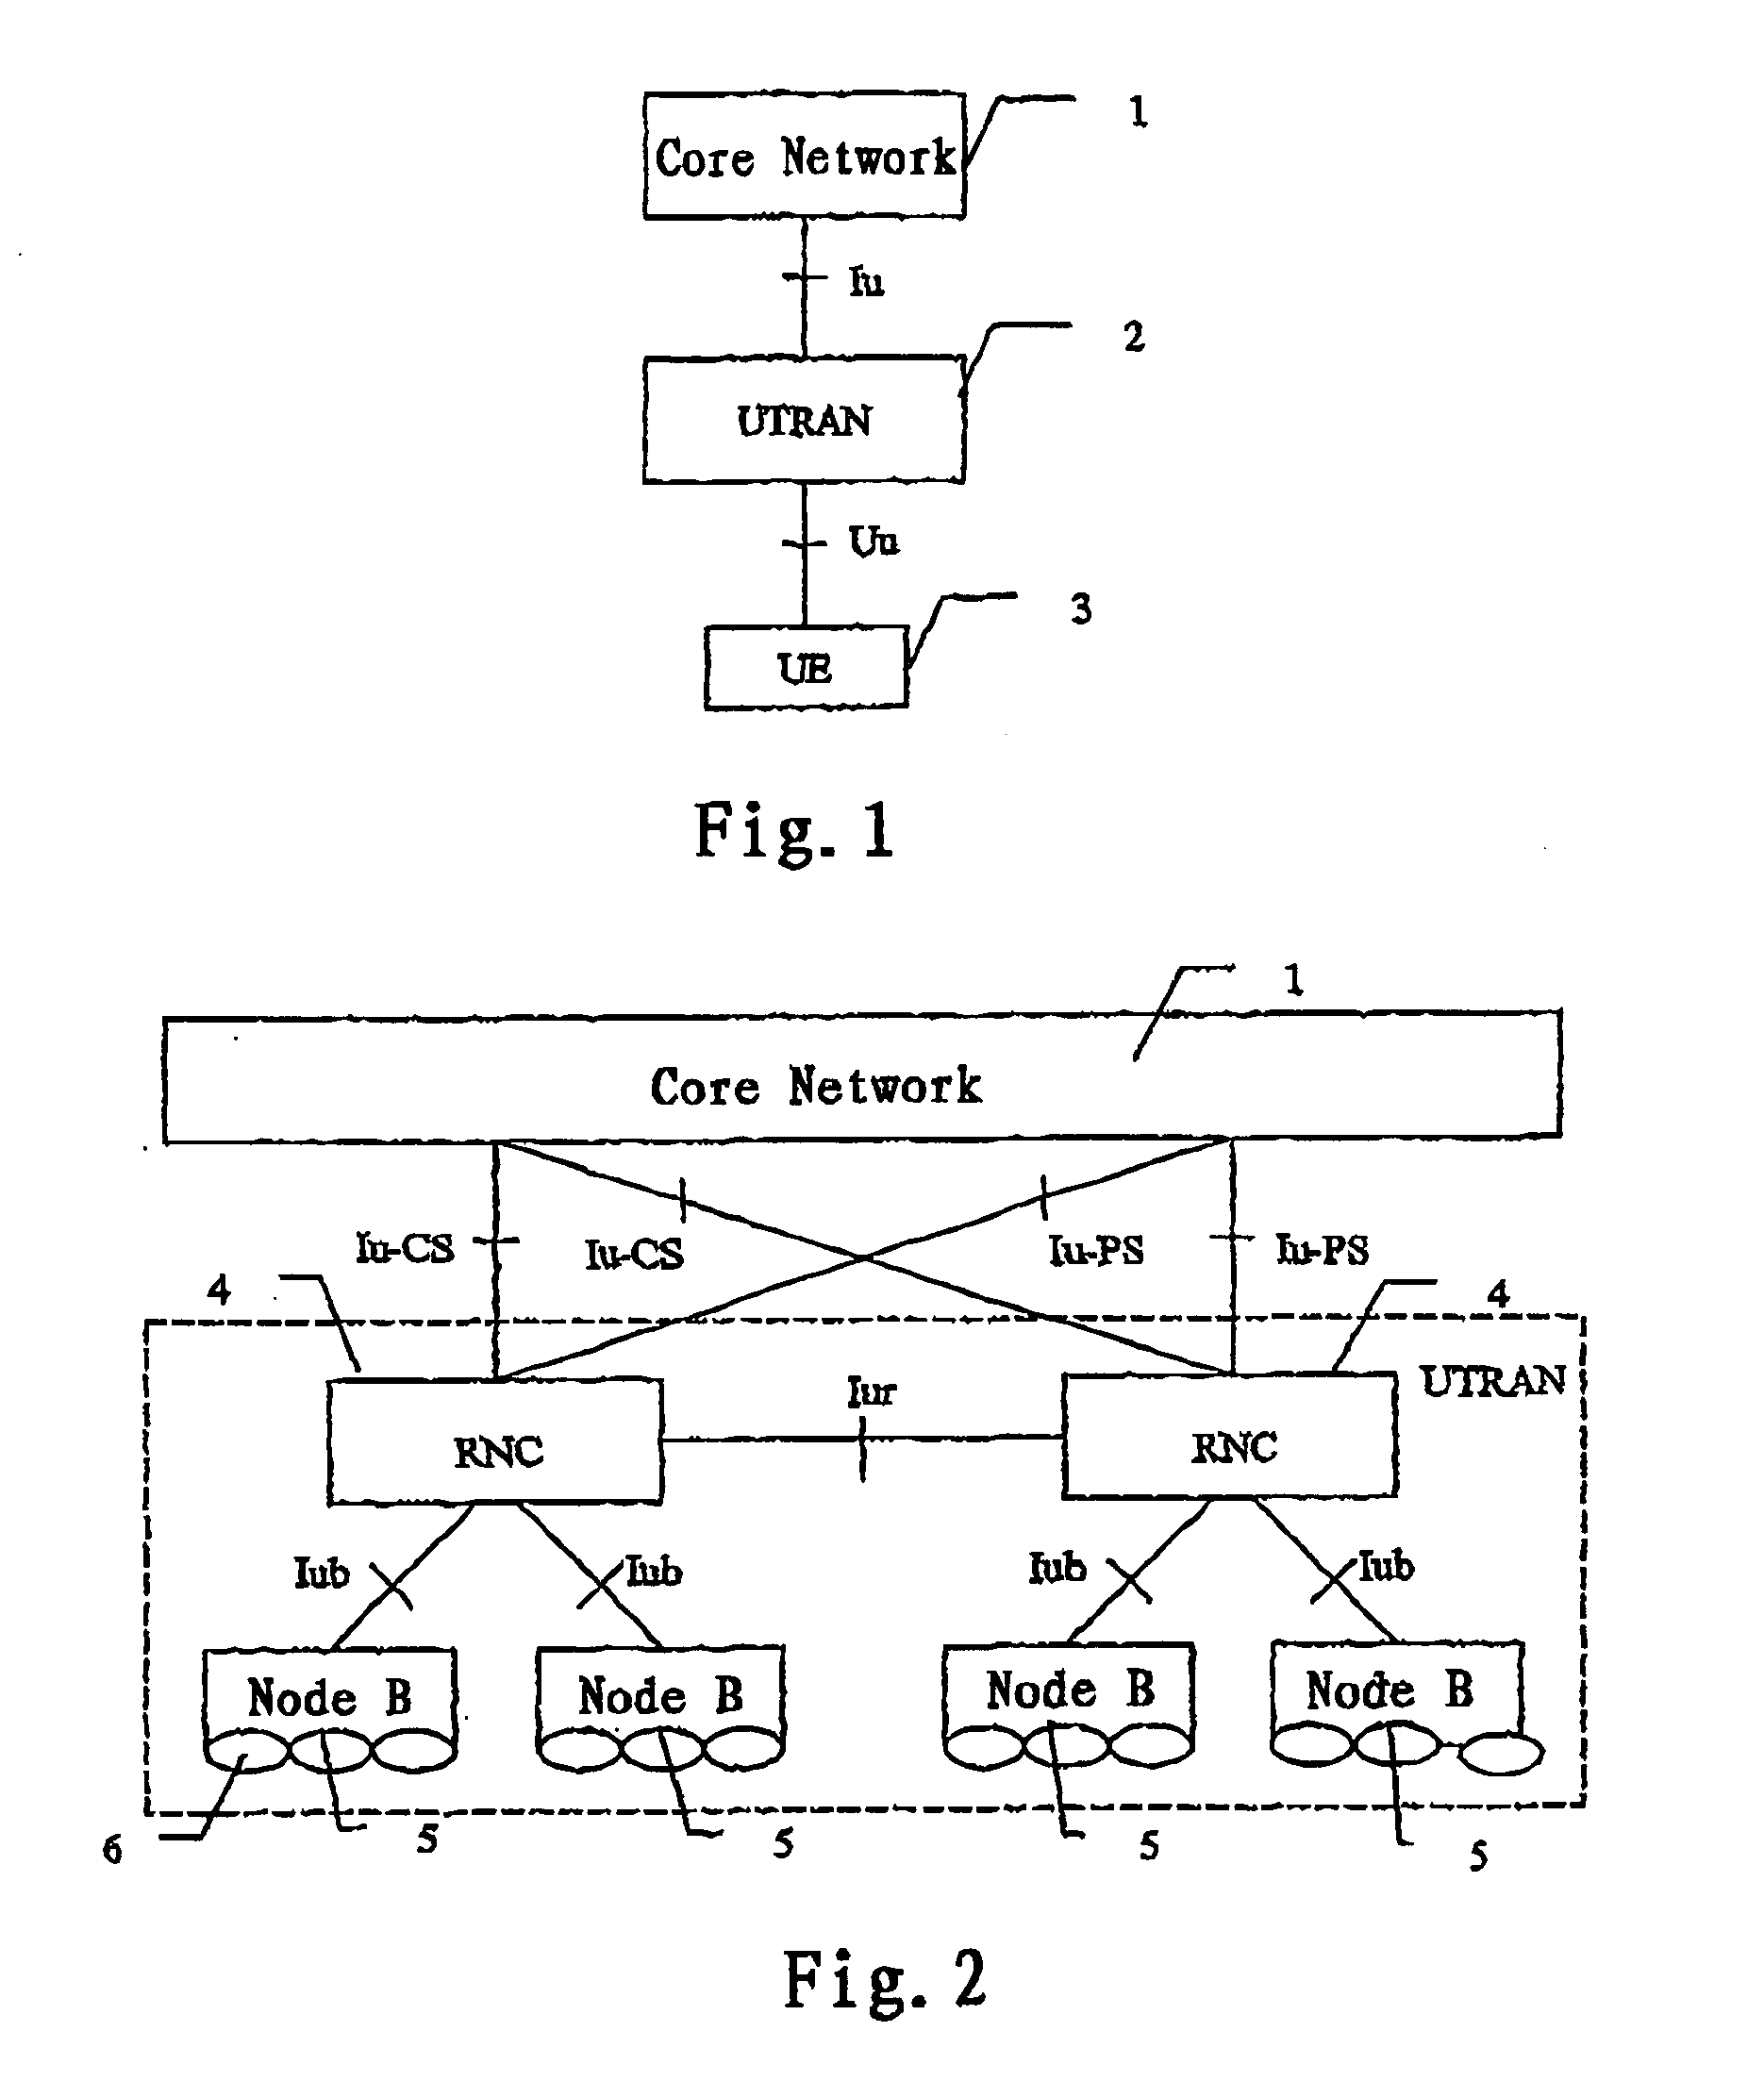 Method for implementing diffserv in the wireless access network of the universal mobile telecommunication system